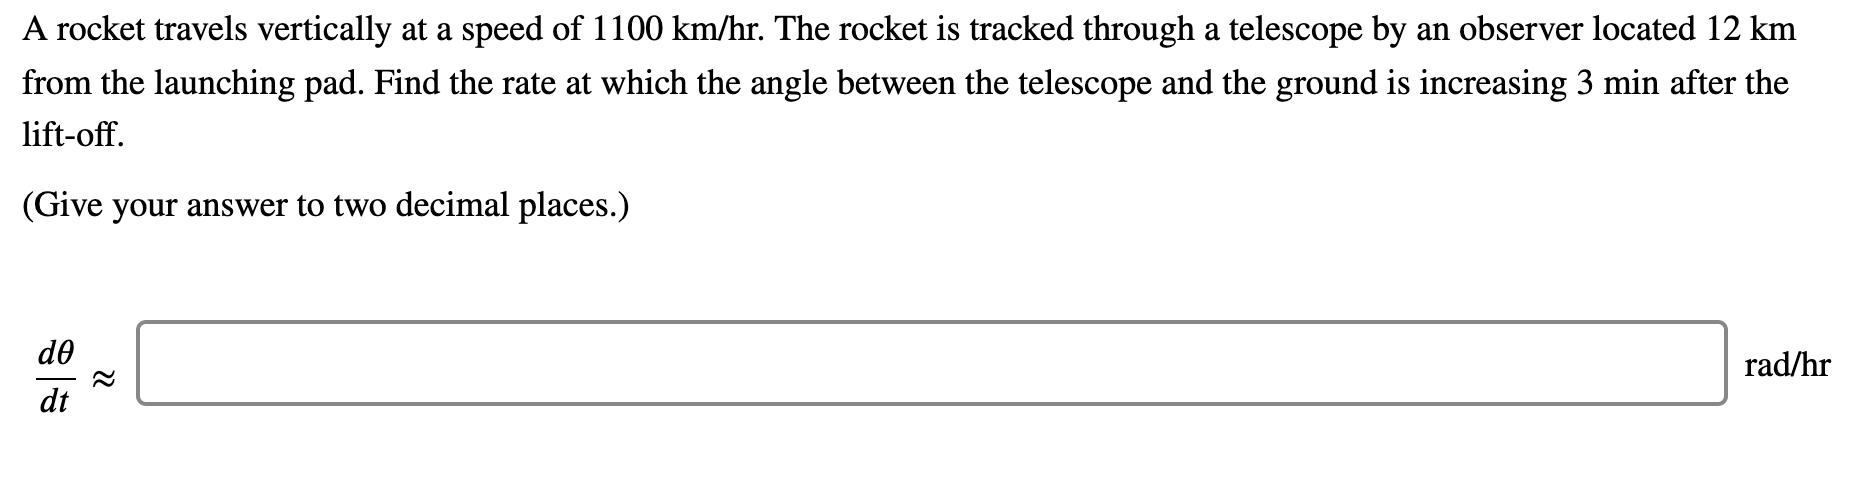 A rocket travels vertically at a speed of 1100 km/hr. The rocket is tracked through a telescope by an observer located 12 km
from the launching pad. Find the rate at which the angle between the telescope and the ground is increasing 3 min after the
lift-off.
(Give your answer to two decimal places.)
de
rad/hr
dt
